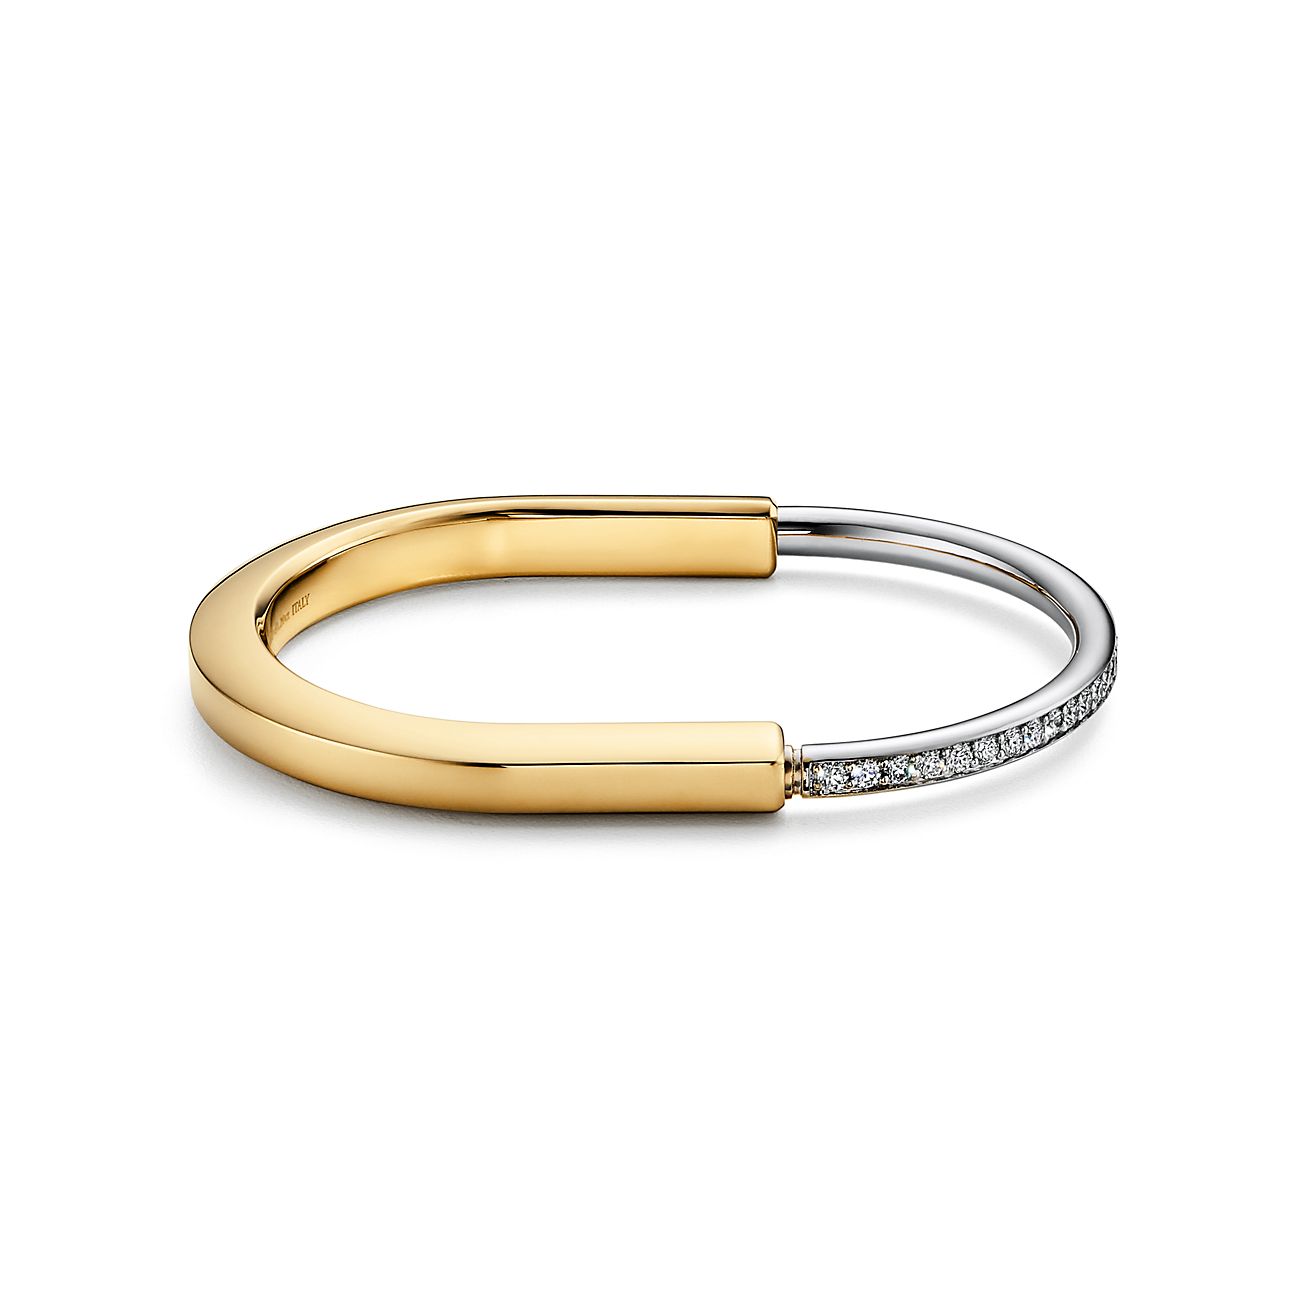 Tiffany Lock Bangle in Yellow and White Gold with Half Pavé Diamonds | Tiffany & Co.